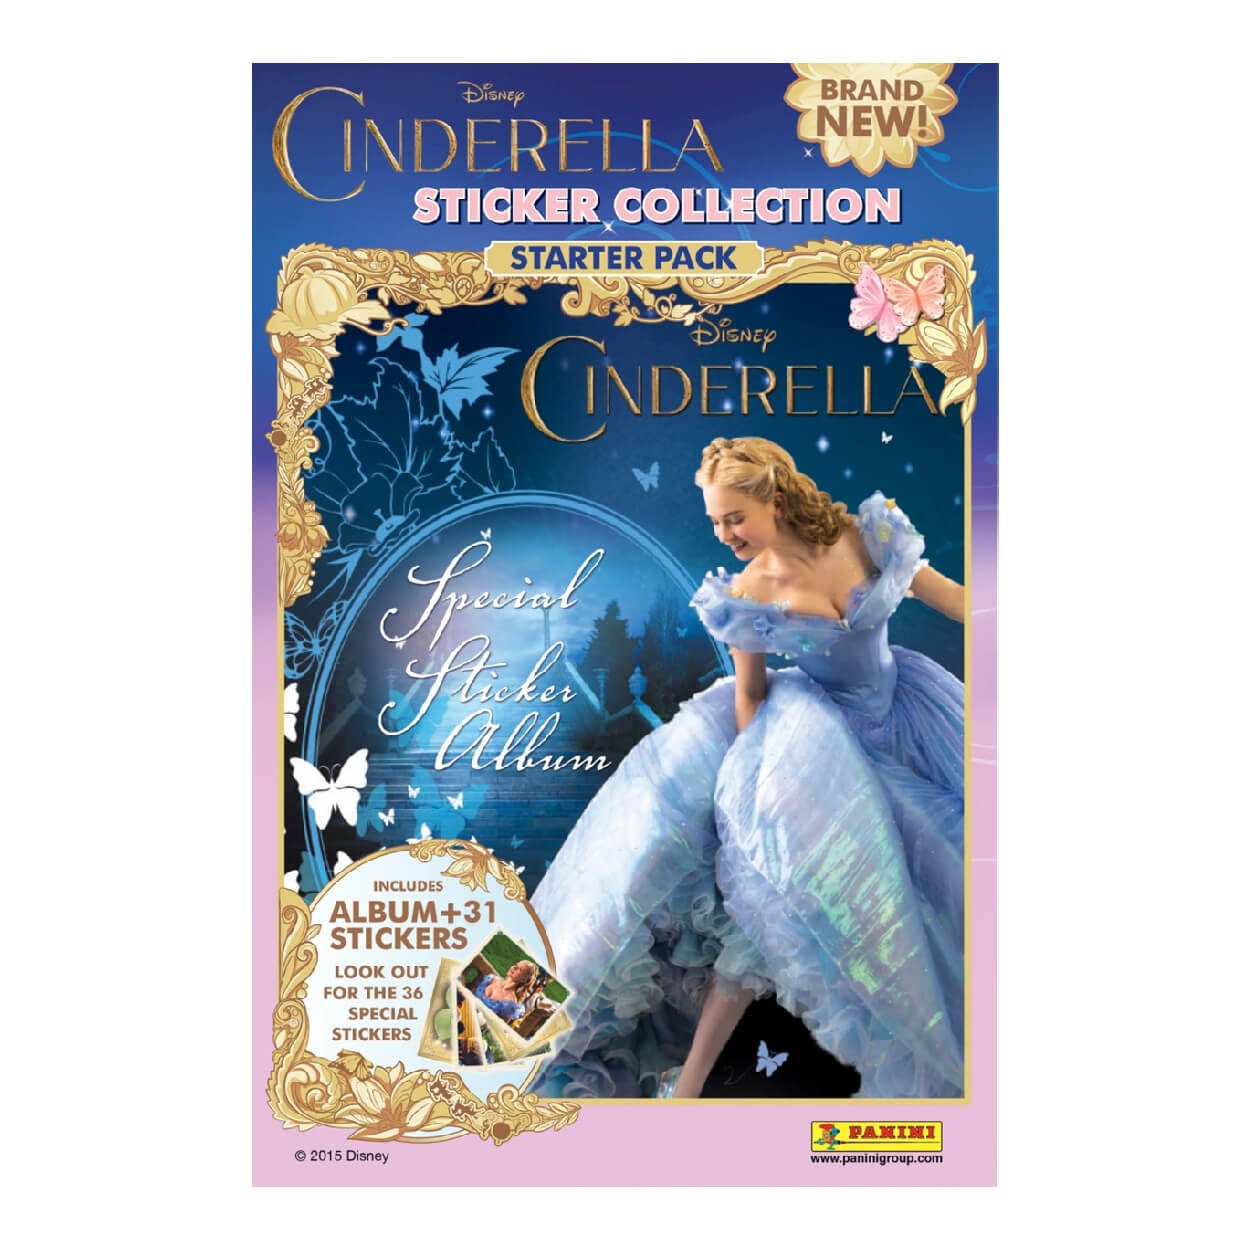 PaniniCinderella Sticker CollectionProduct: Starter Pack (31 Stickers)Sticker CollectionEarthlets